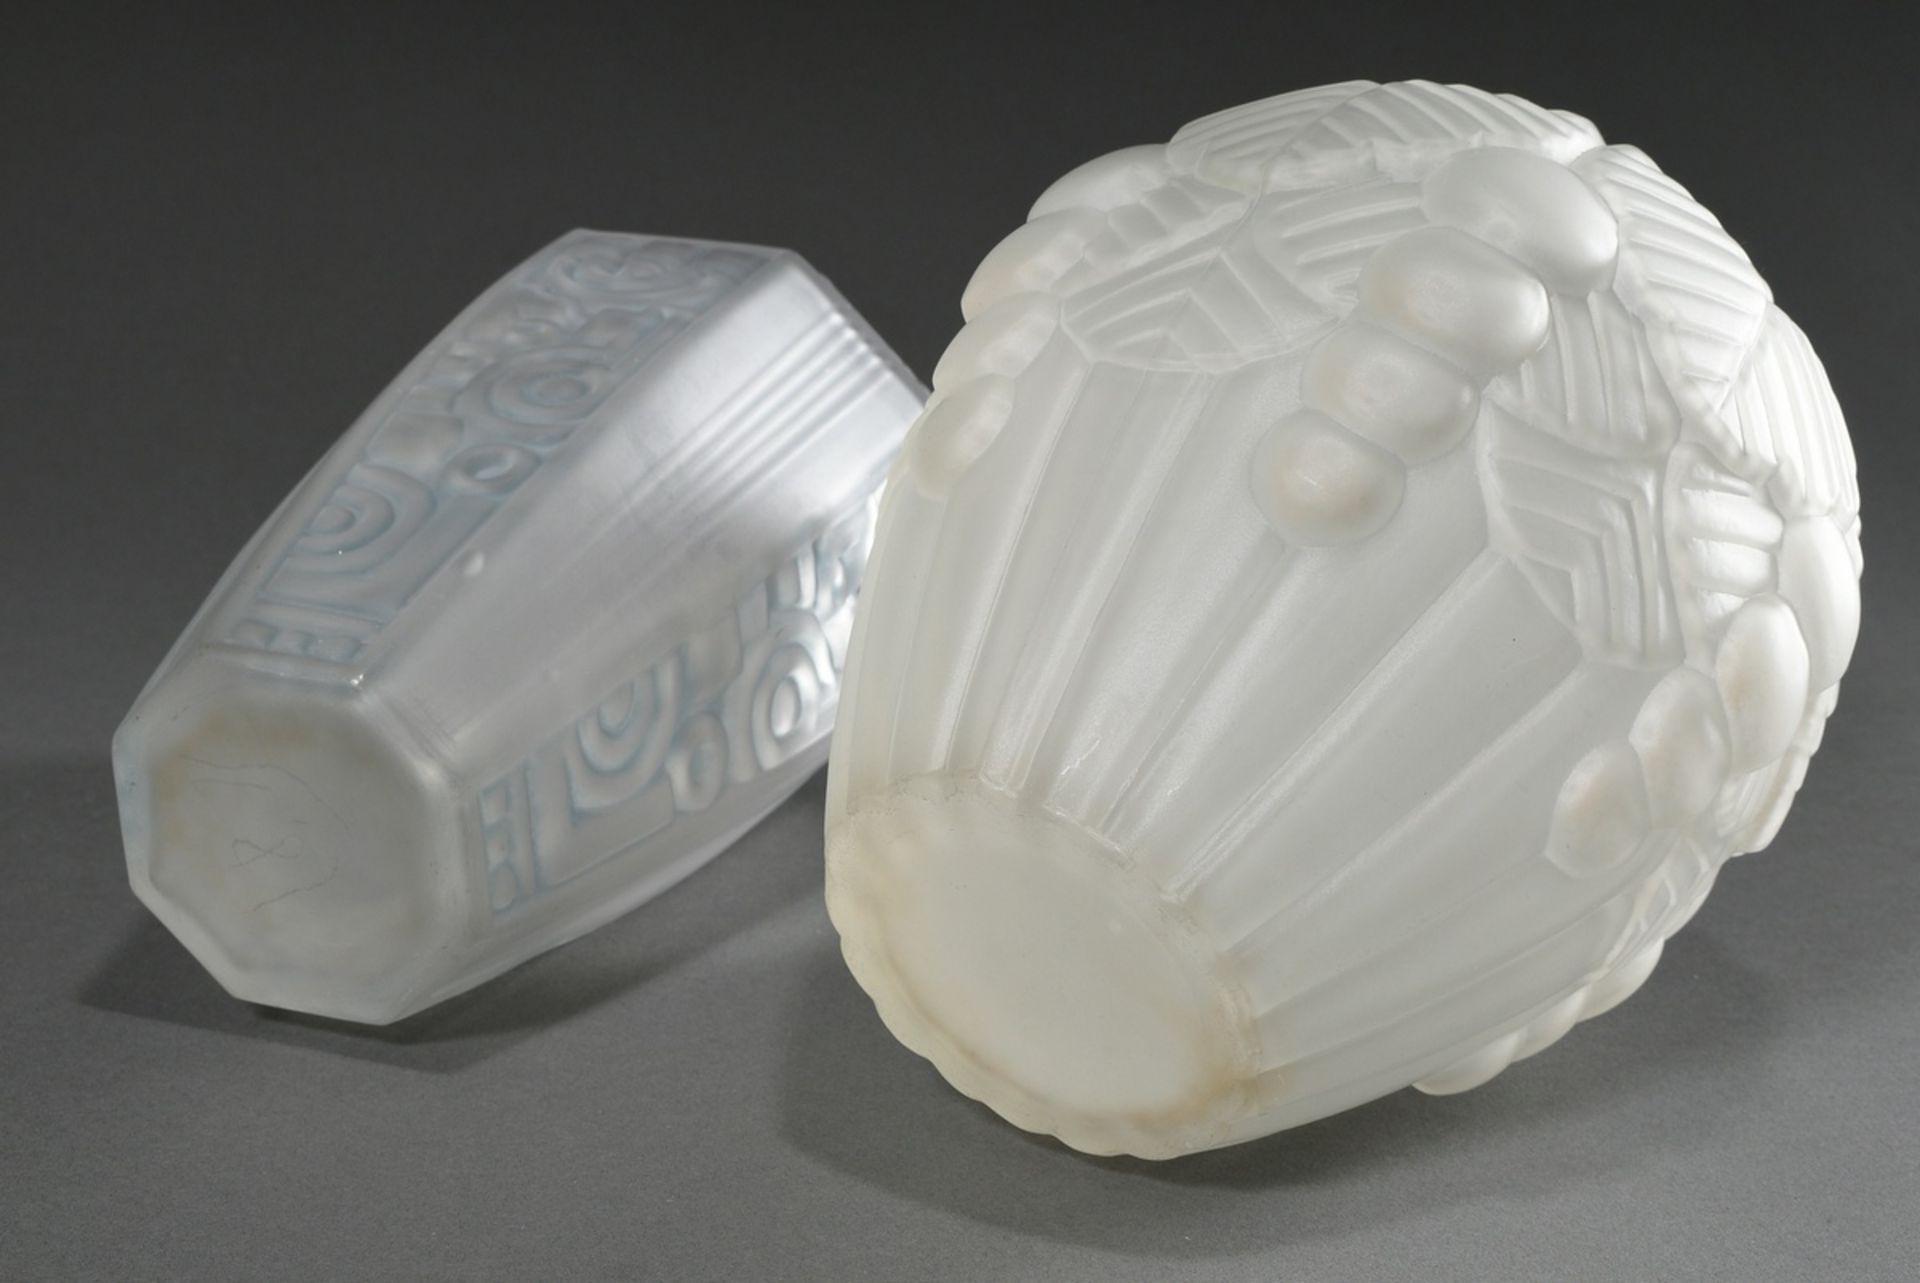 2 Various Art Deco glass vases blown into the mould with geometric and floral abstract patterns, ma - Image 3 of 5